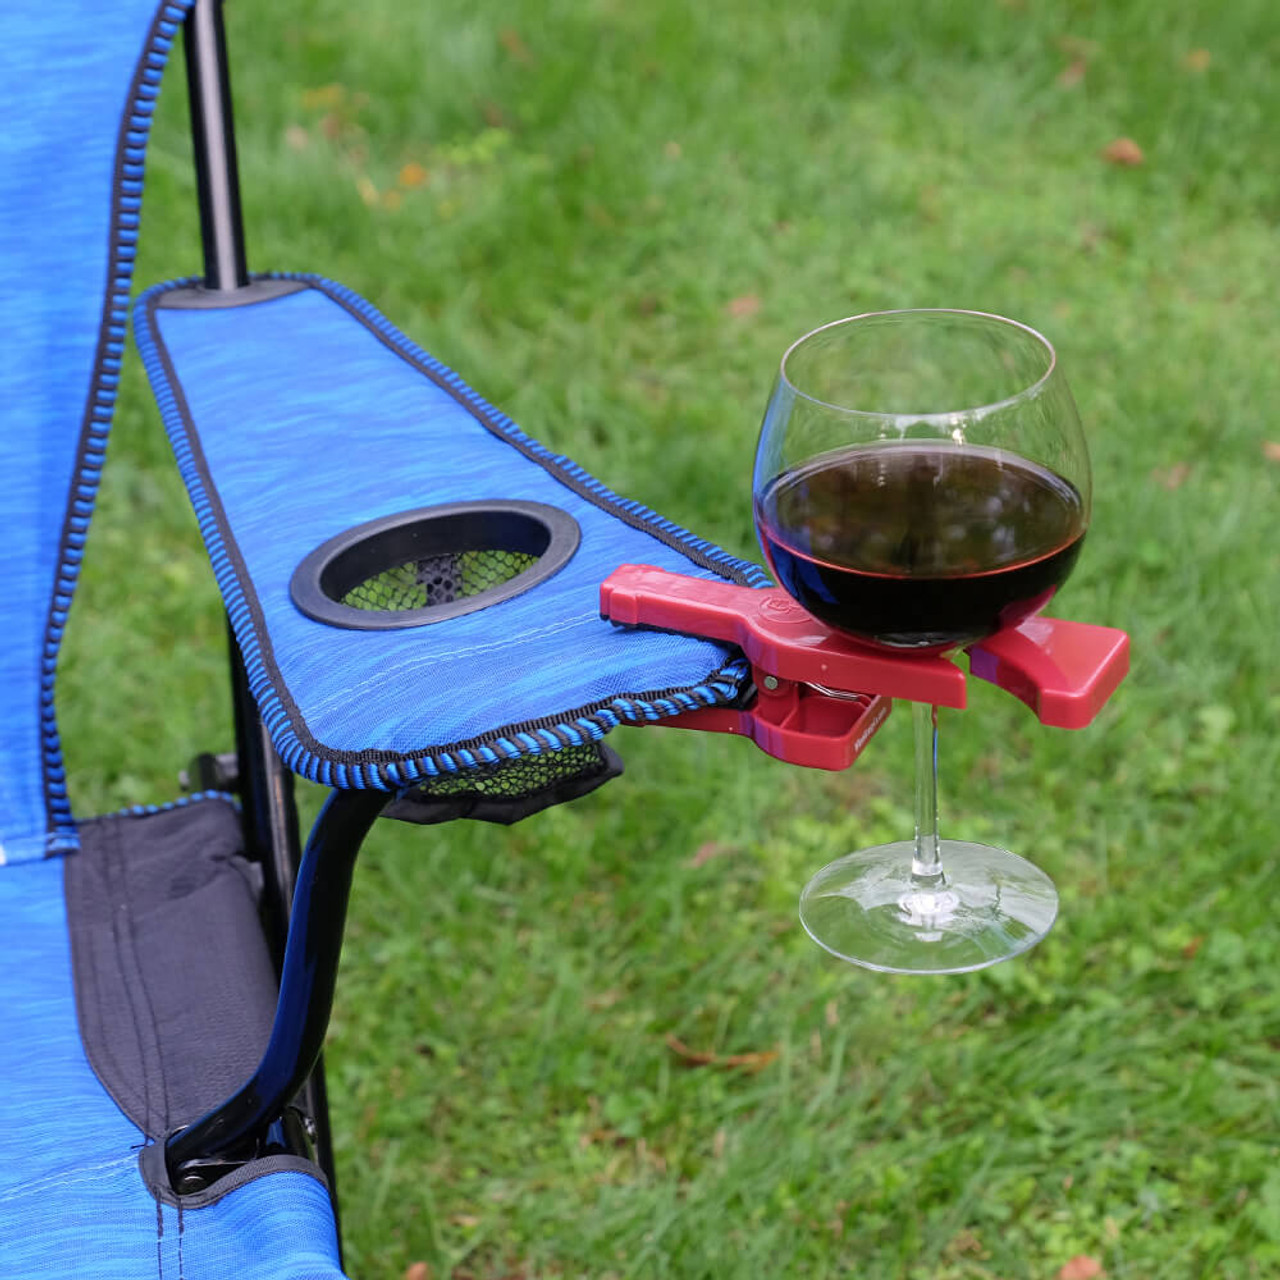 https://cdn11.bigcommerce.com/s-cznxq08r7/images/stencil/1280x1280/products/5048/13990/WG1-W24-WineGrasp-Stemware-Glass-Holder-Clamp-Attach-To-Outdoor-Chairs-For-Wine-Martini-and-Champagne-Glasses-002__34486.1638983075.jpg?c=1